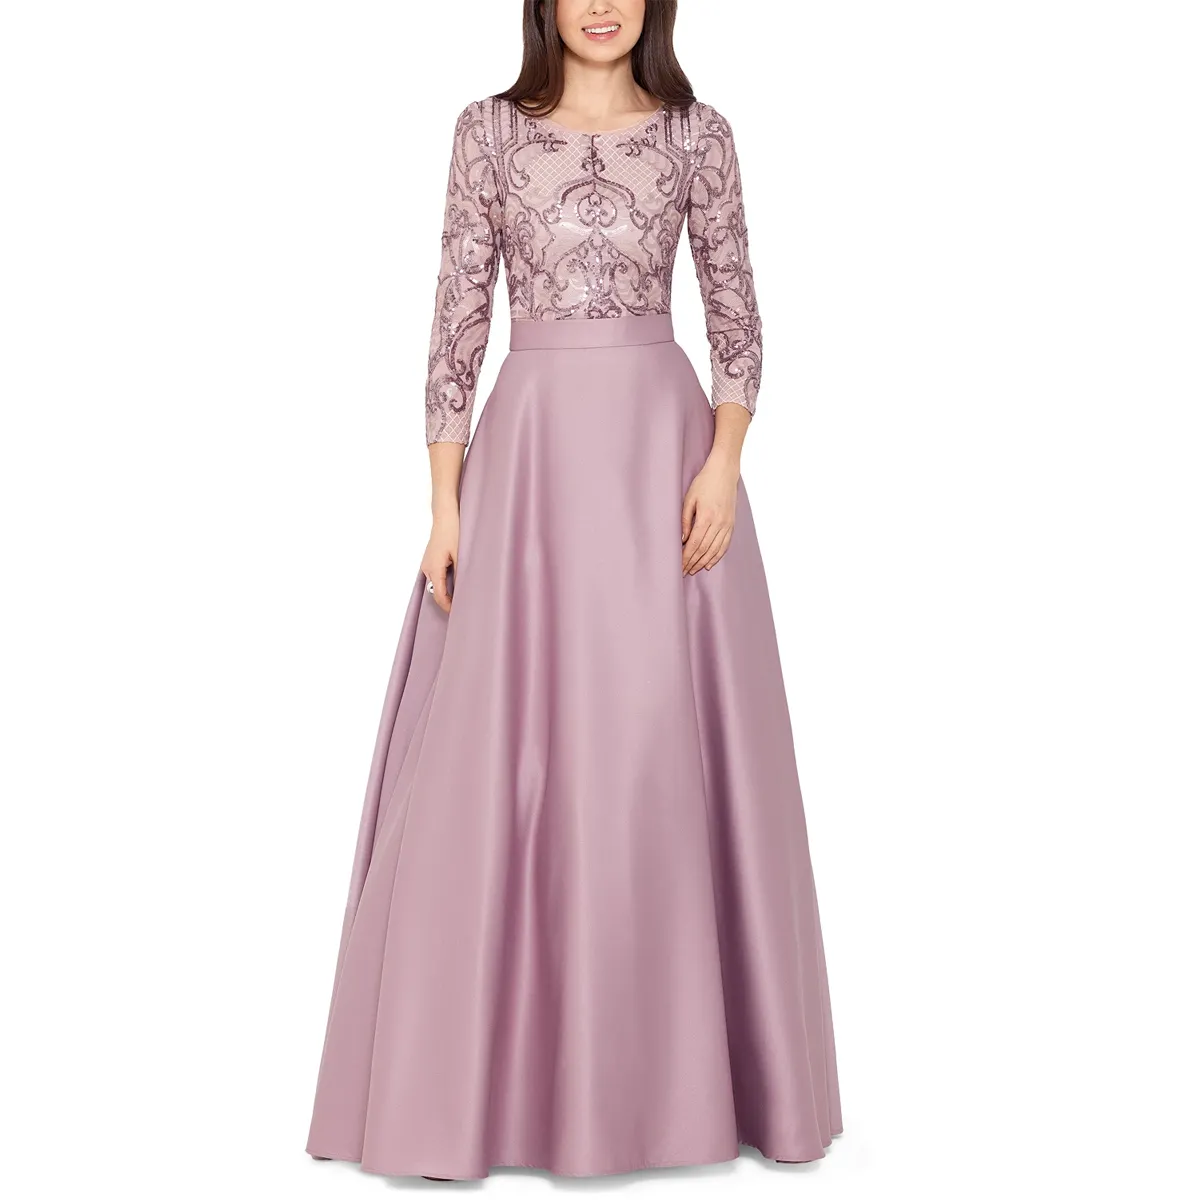 Bride Dresses Boat Neck Long Sleeves Lace High Waist Front Cascading Ruffles Chiffon Evening Gown Dress Sequined Top Ball Gown